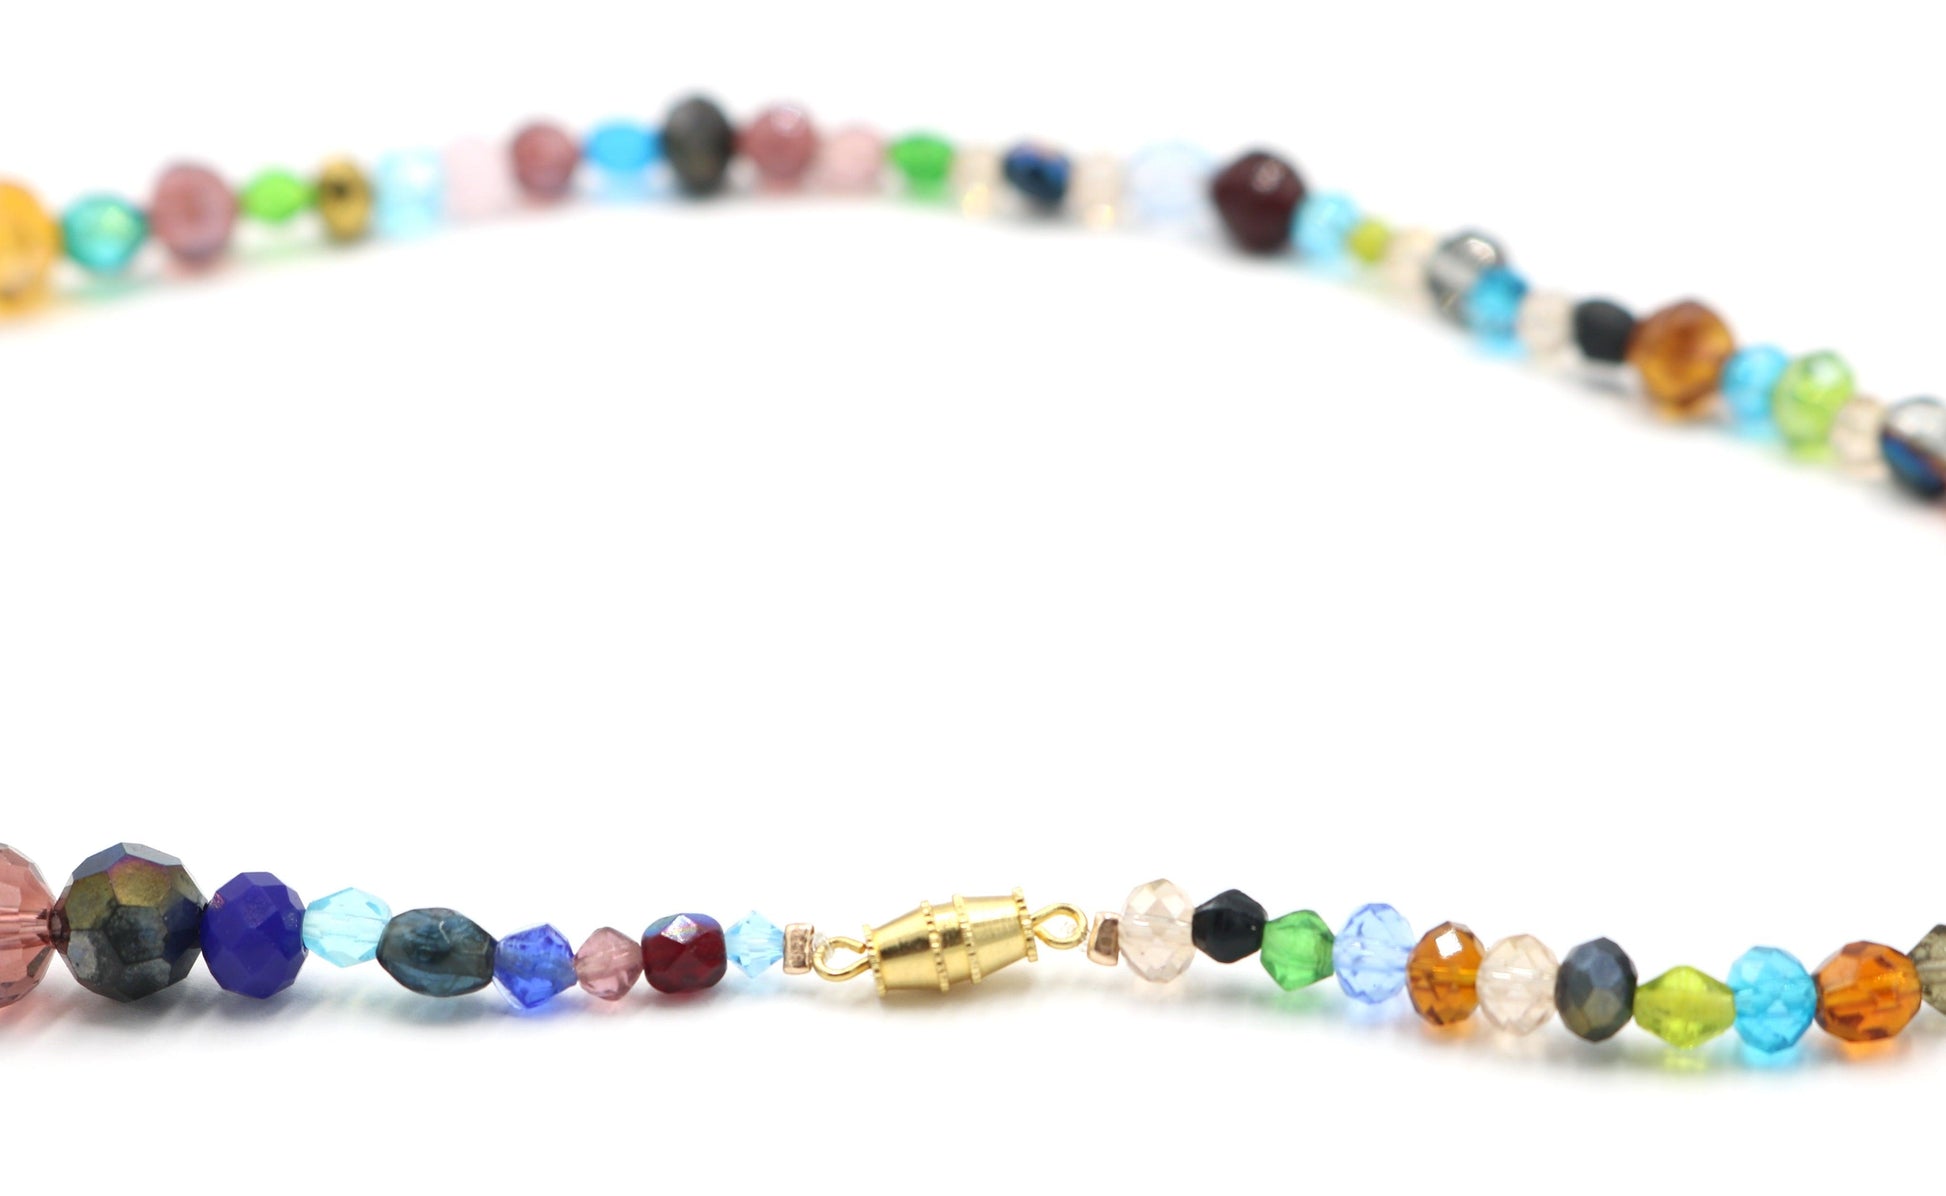 Limited Edition of 1 - Women's Luxury 21.5" Faceted Assorted Glass Bead Necklace - Monkeysmojo